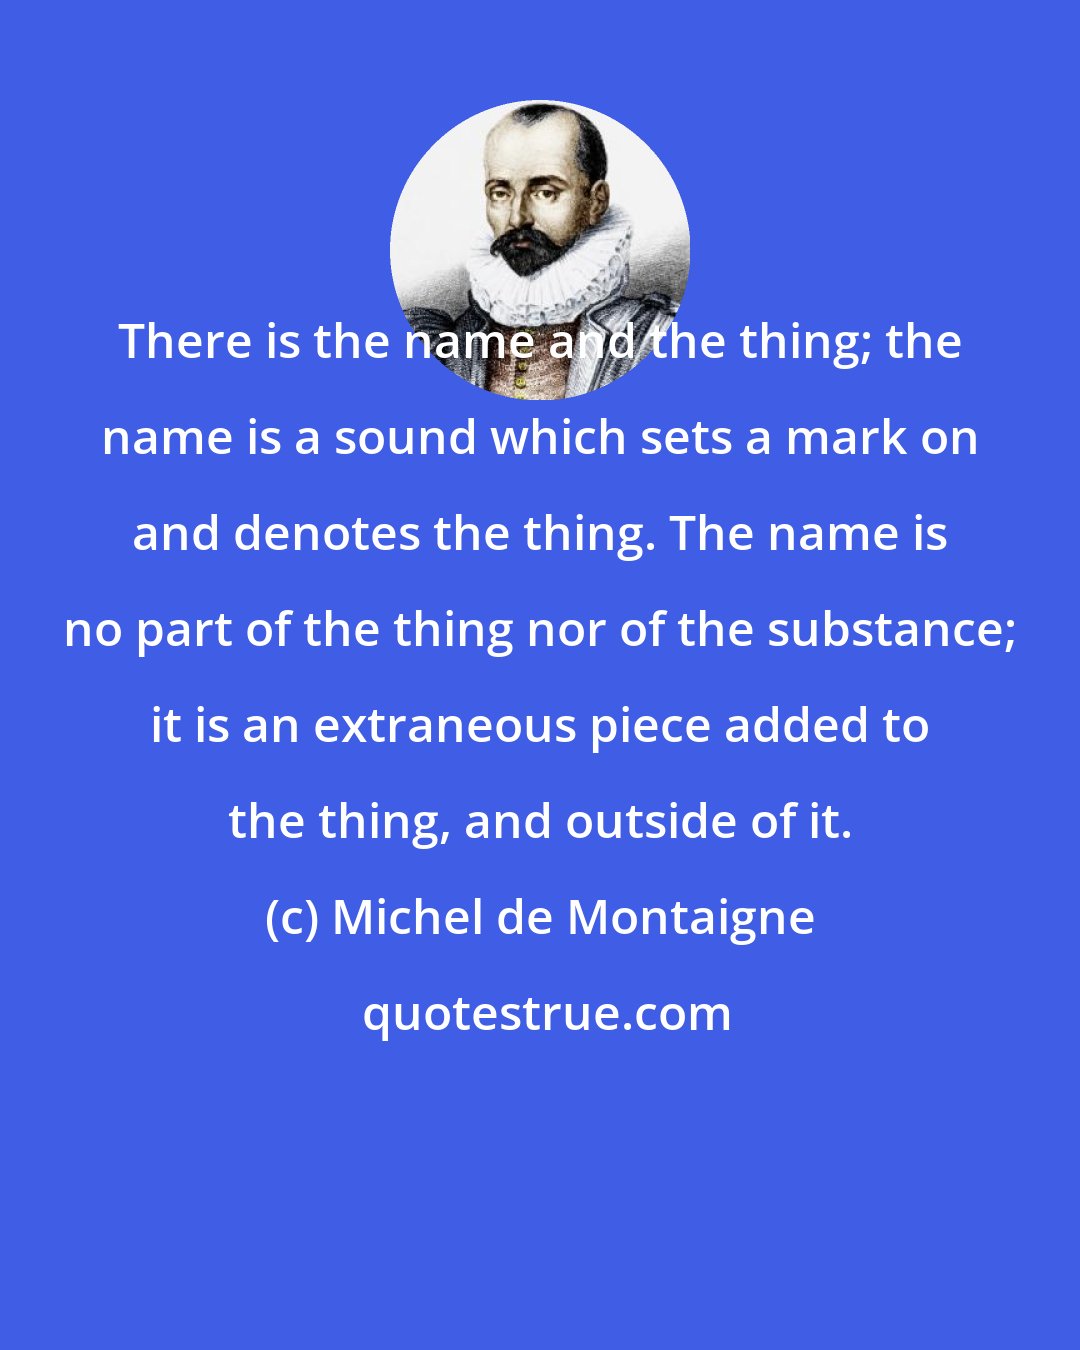 Michel de Montaigne: There is the name and the thing; the name is a sound which sets a mark on and denotes the thing. The name is no part of the thing nor of the substance; it is an extraneous piece added to the thing, and outside of it.